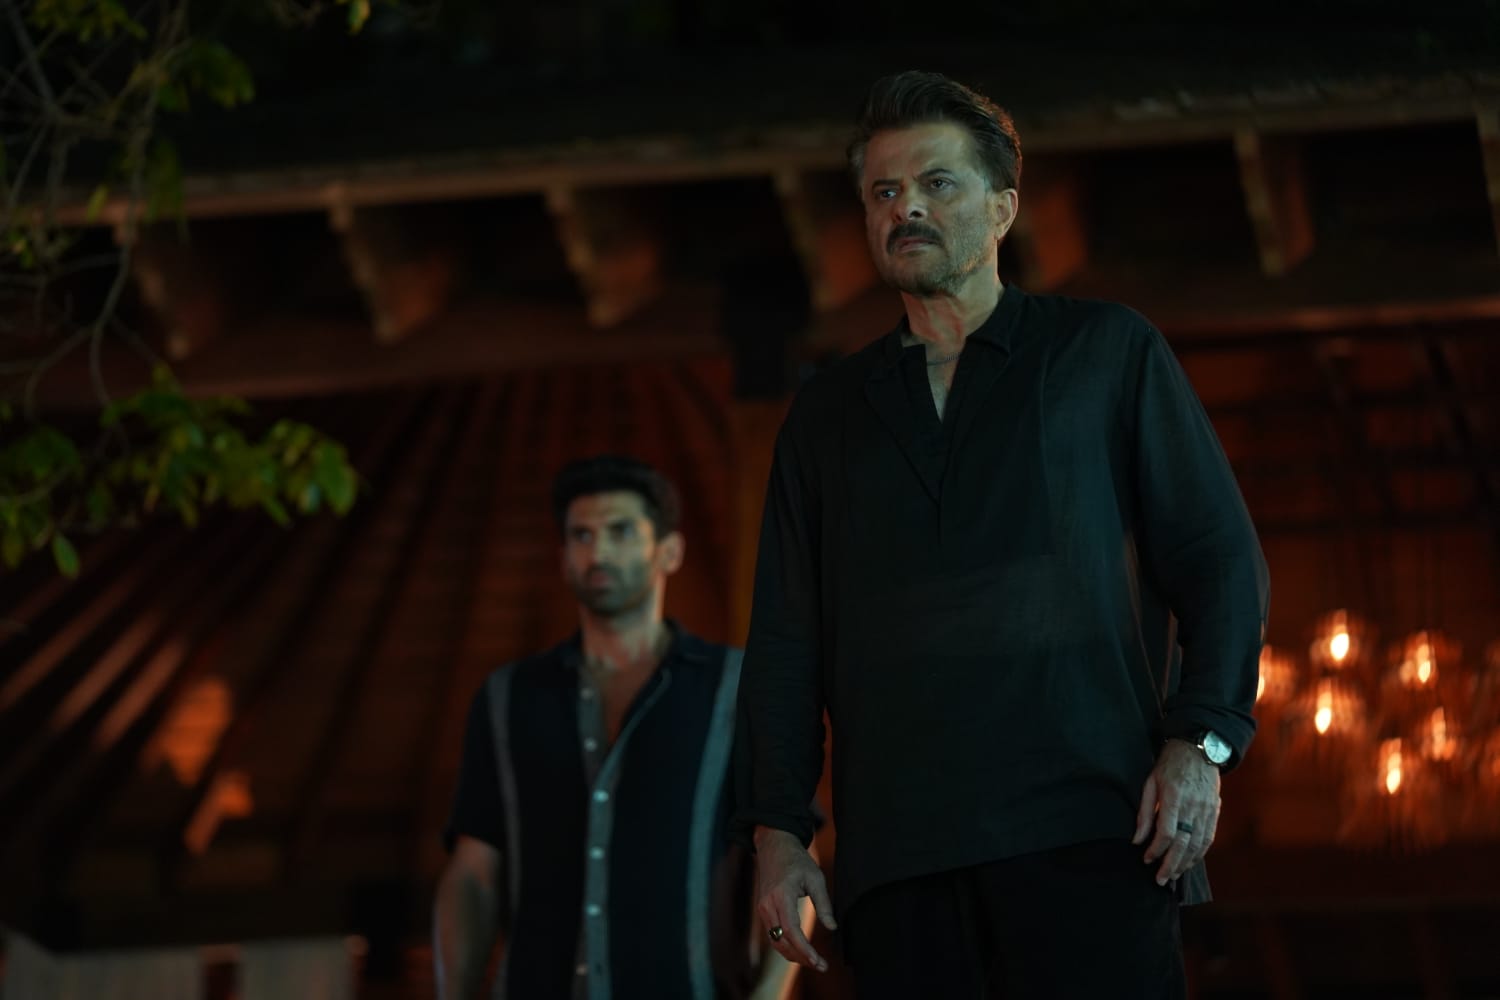 Anil Kapoor and Aditya Roy kapoor in a scene from the Night Manager 2 Web series